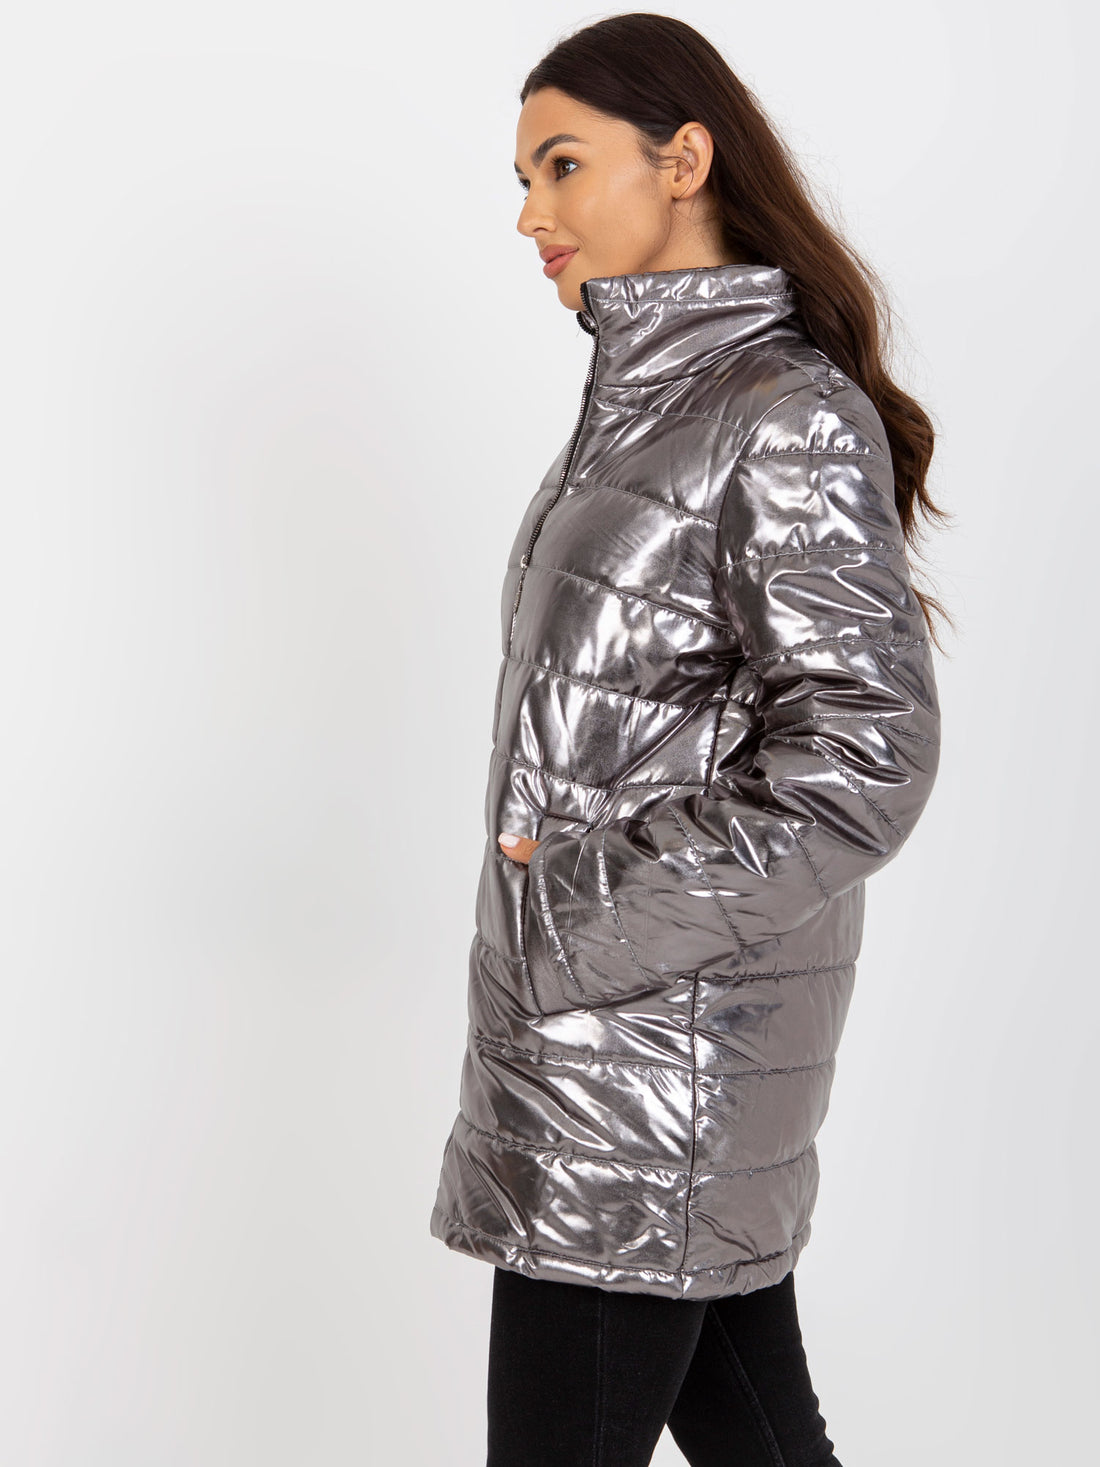 Metallic Silver Puffer Jacket with Pockets